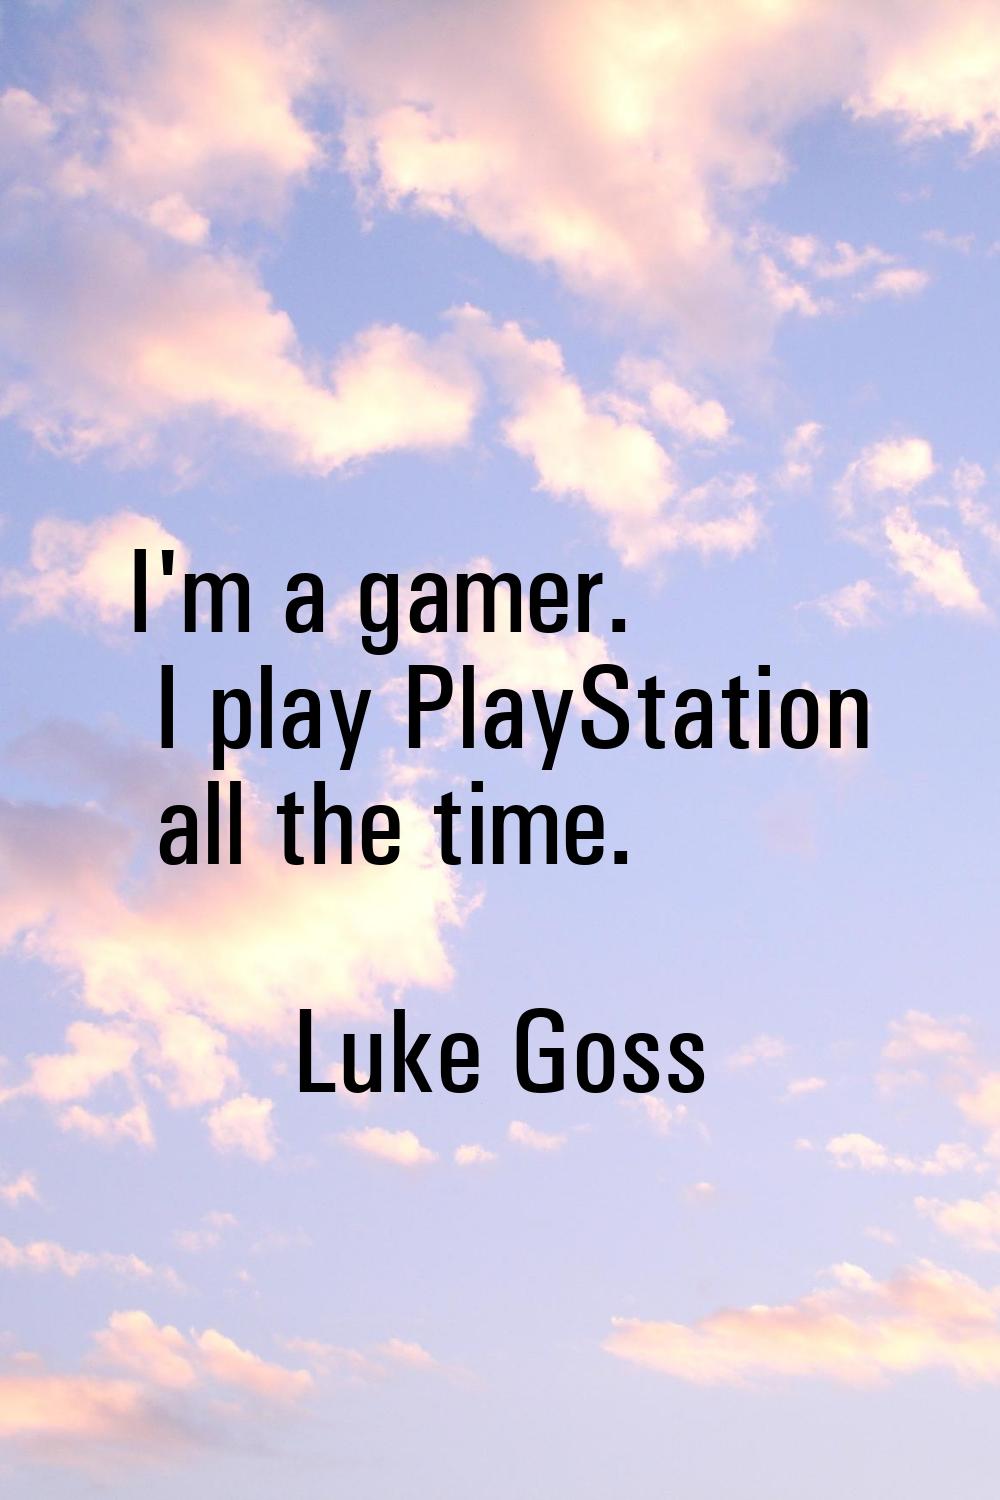 I'm a gamer. I play PlayStation all the time.